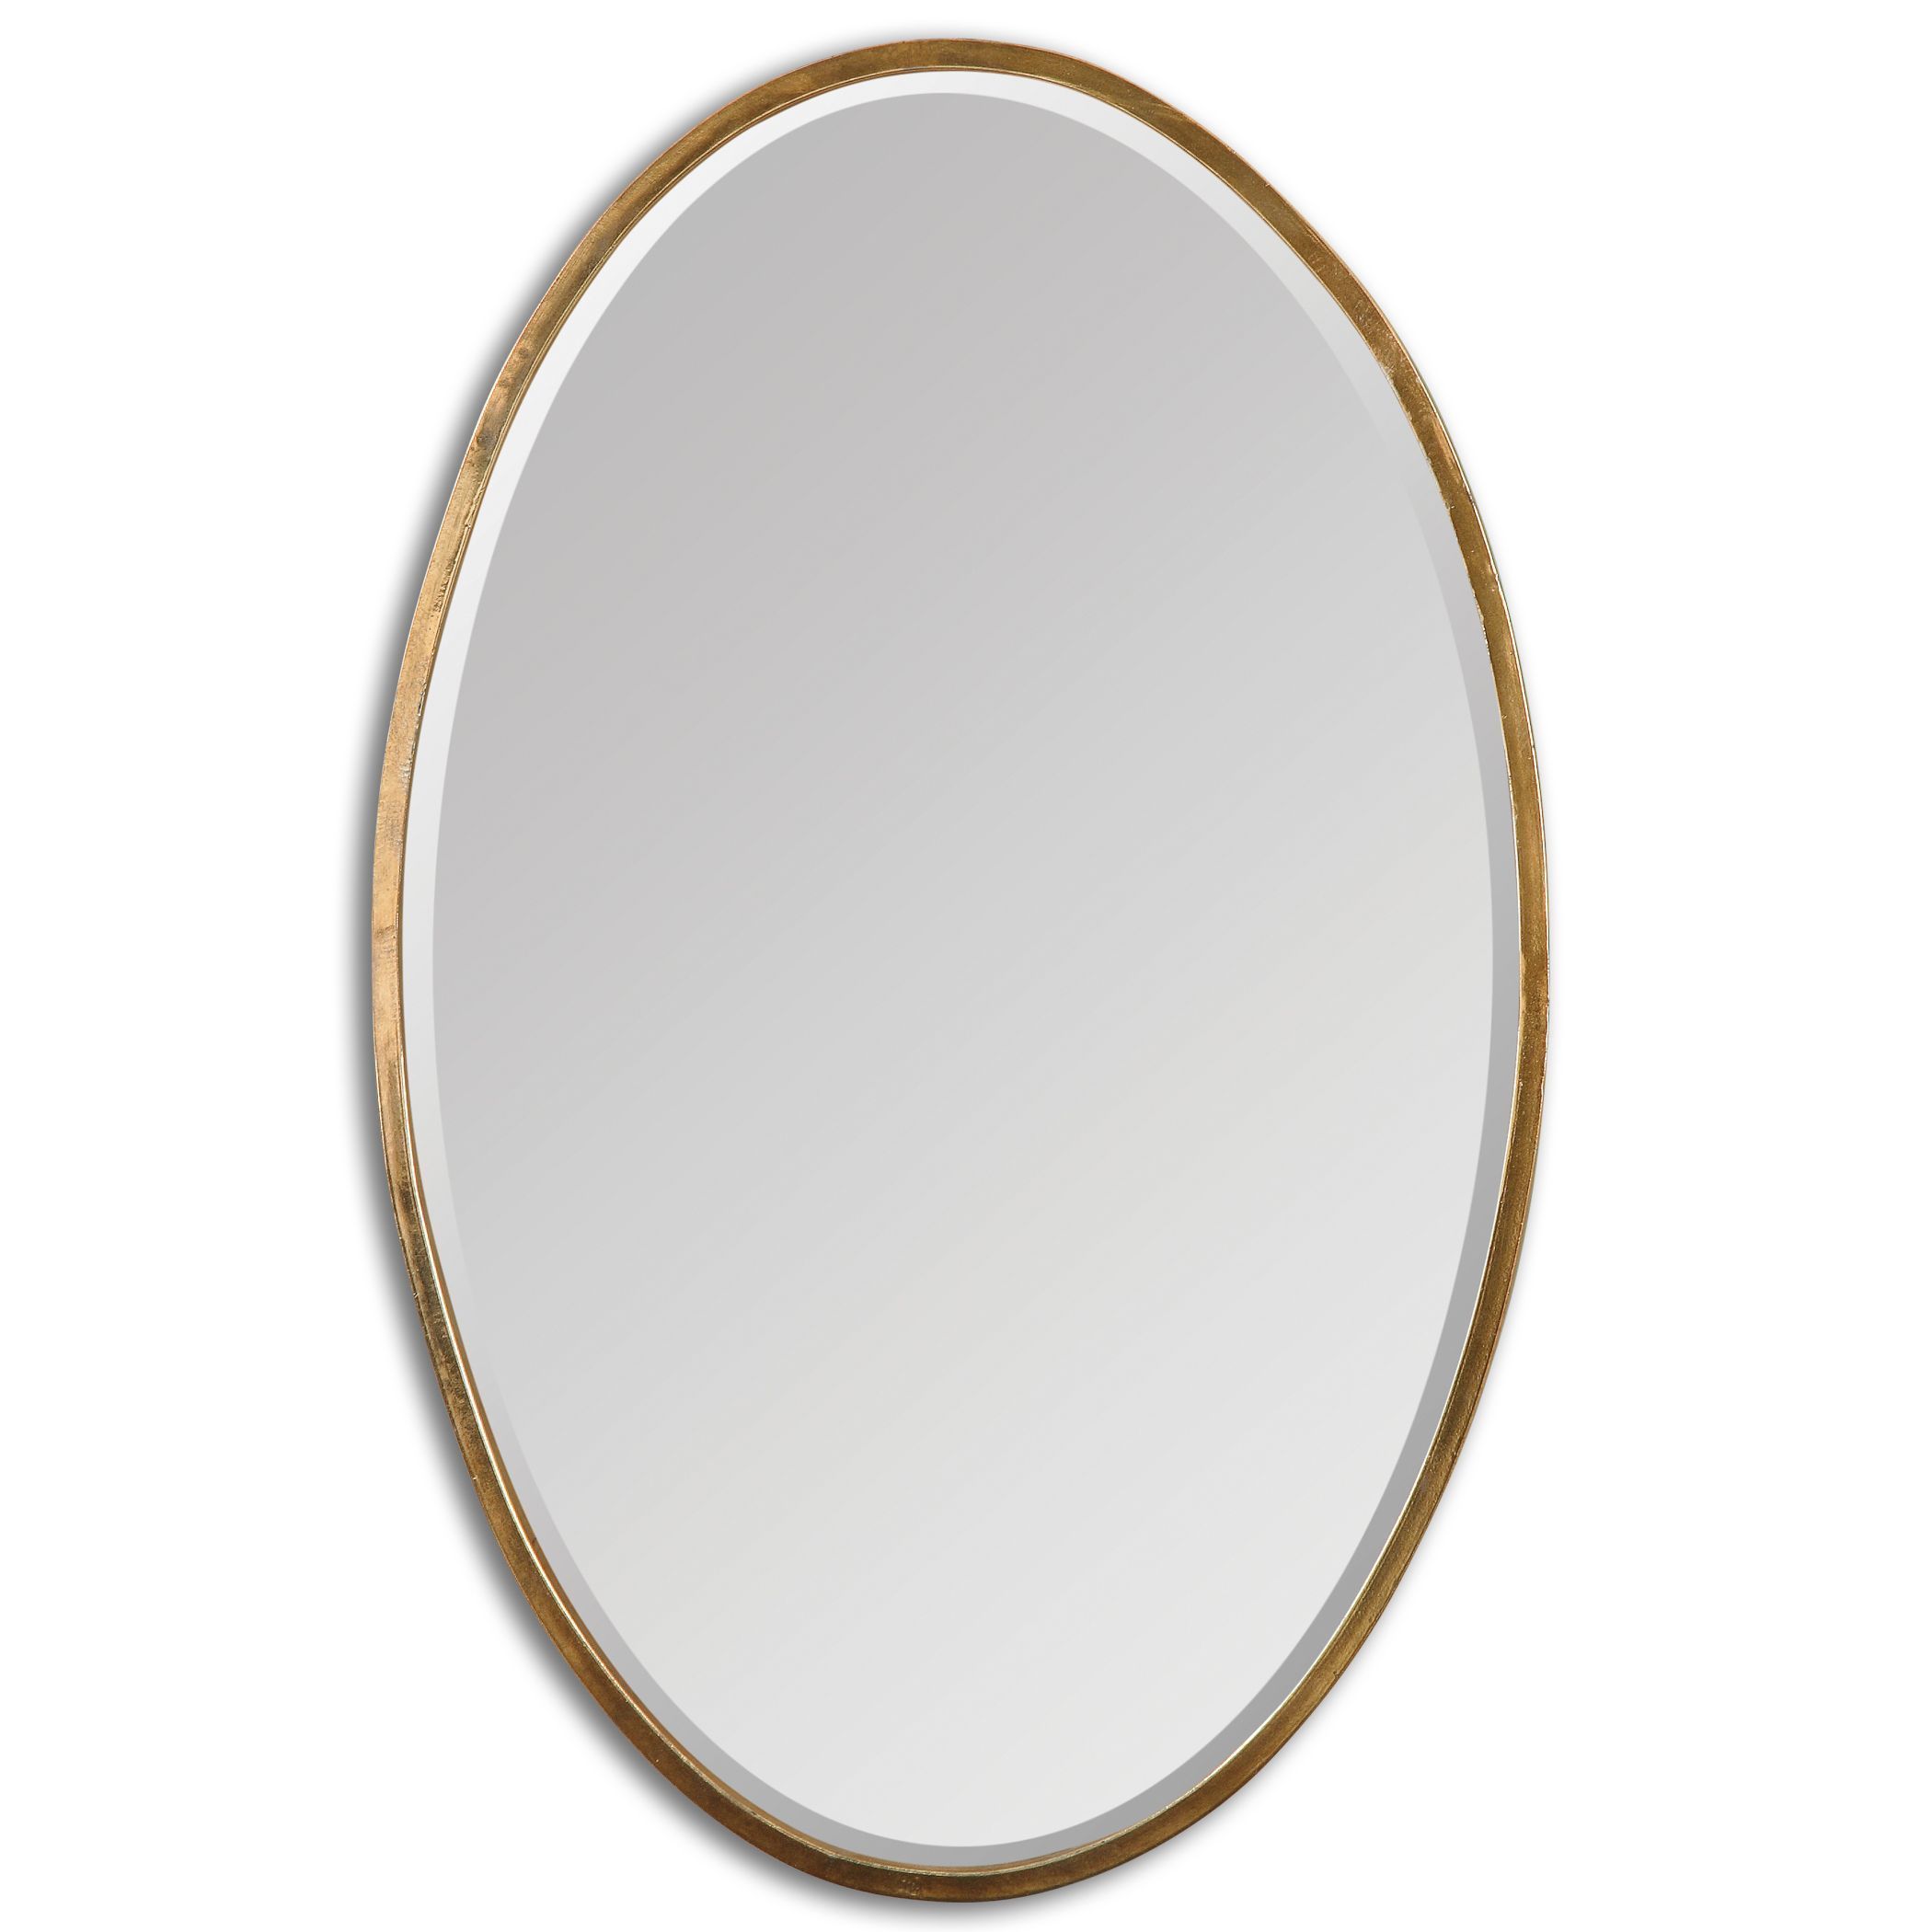 Antique Gold Oval Mirror 